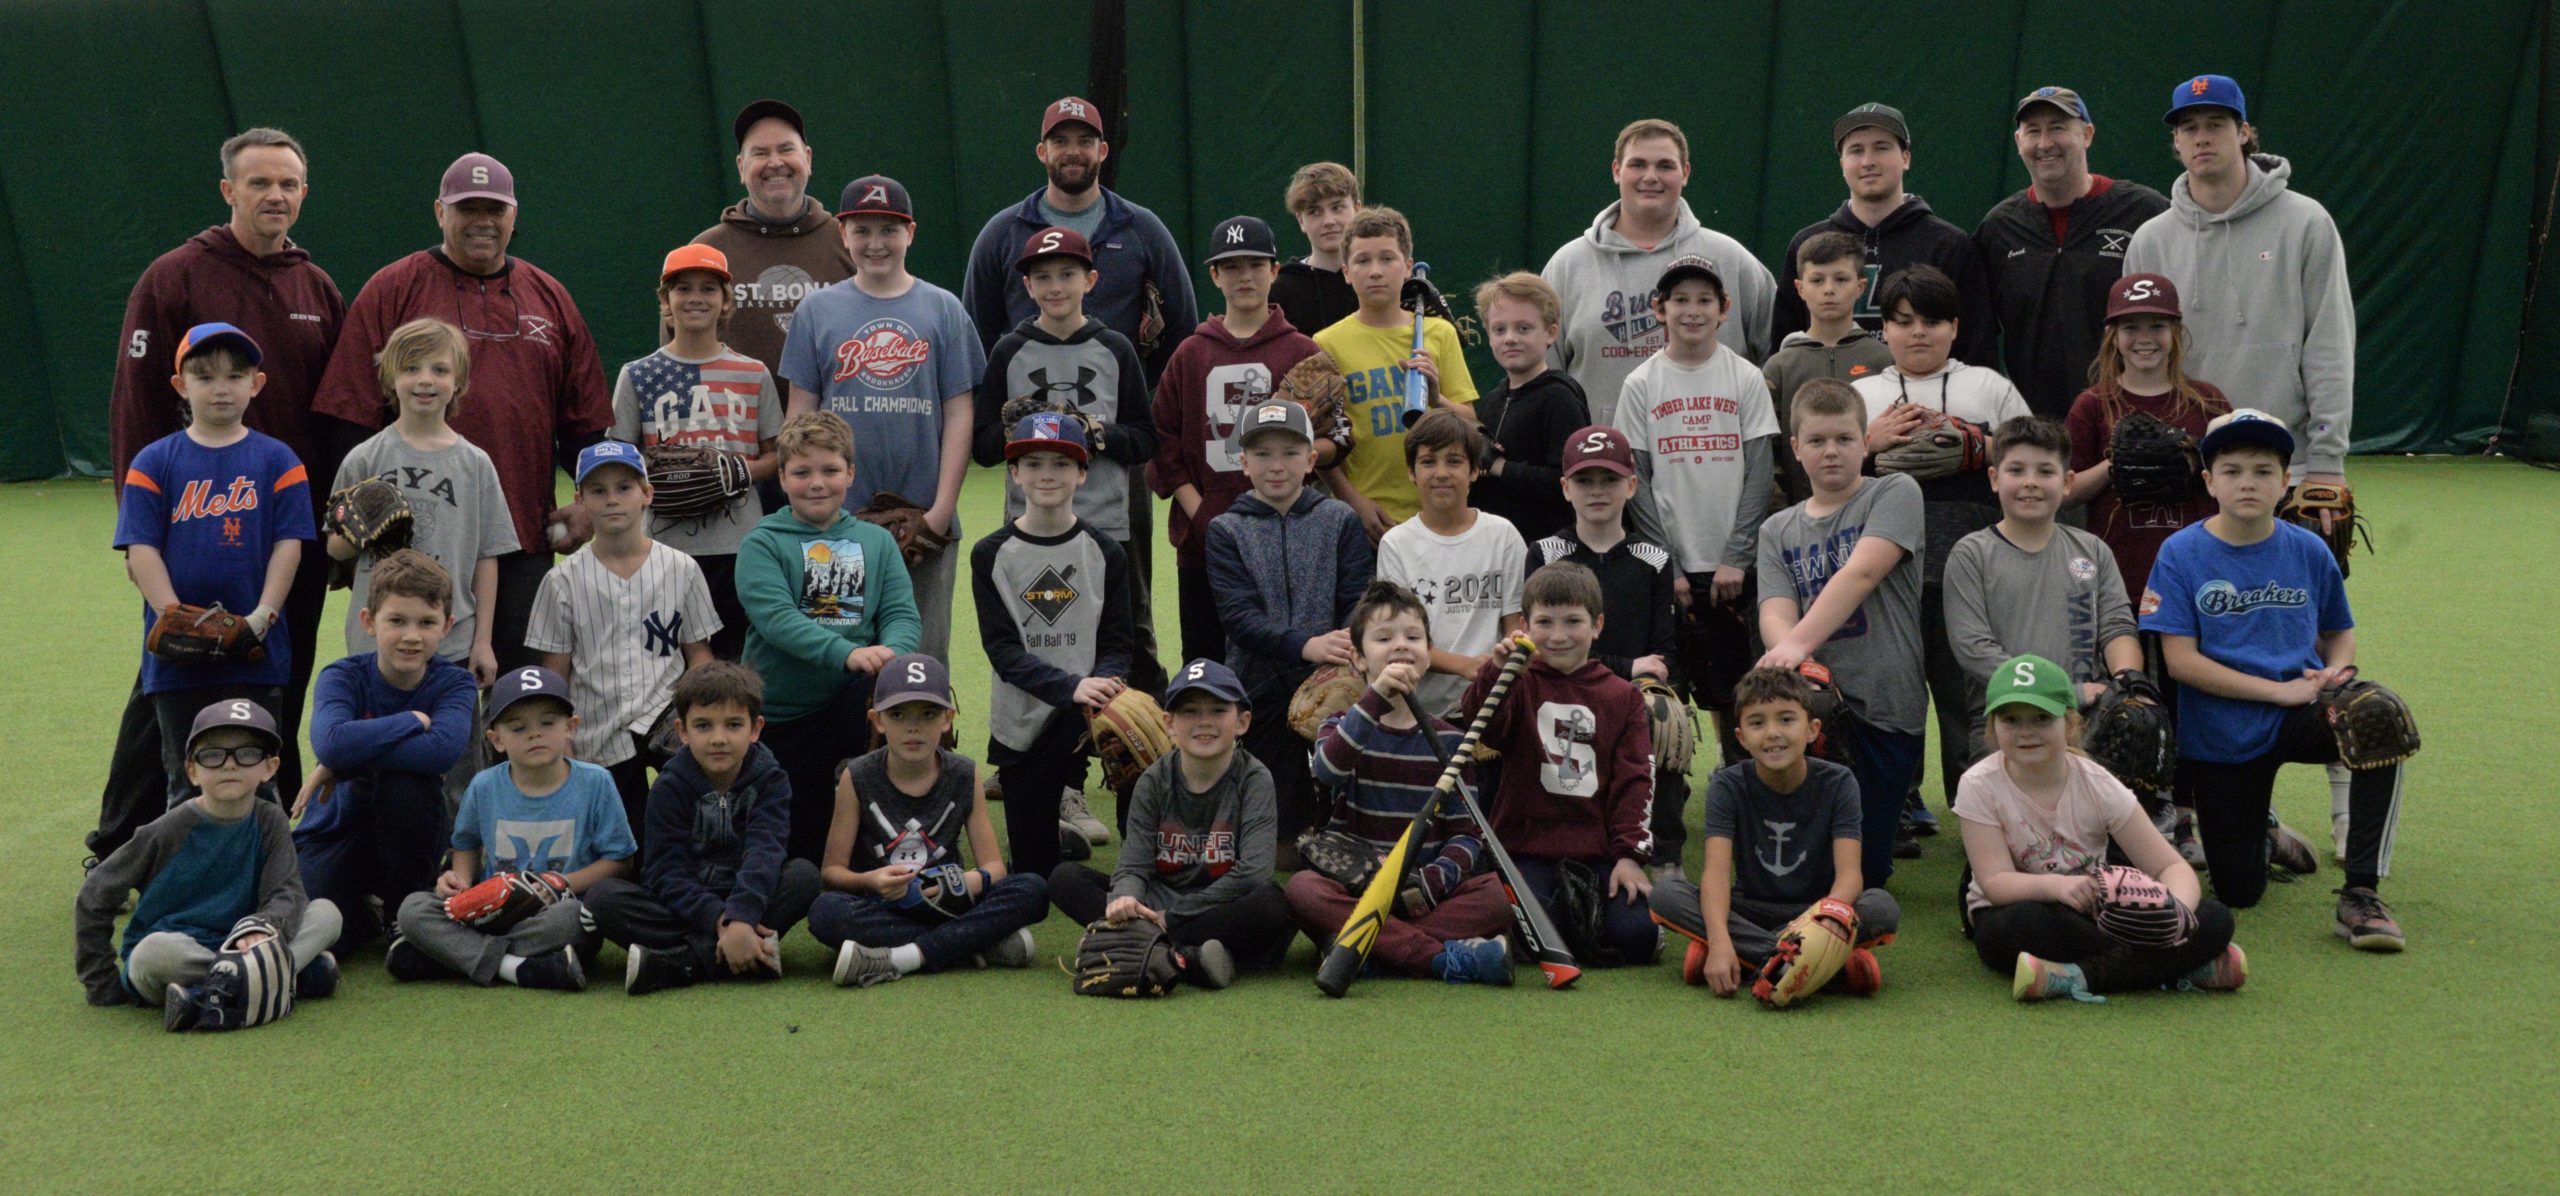 Boys and girls are getting ready for a new season of Southampton Little League by participating in winter clinics. MICHELLE MALONE  